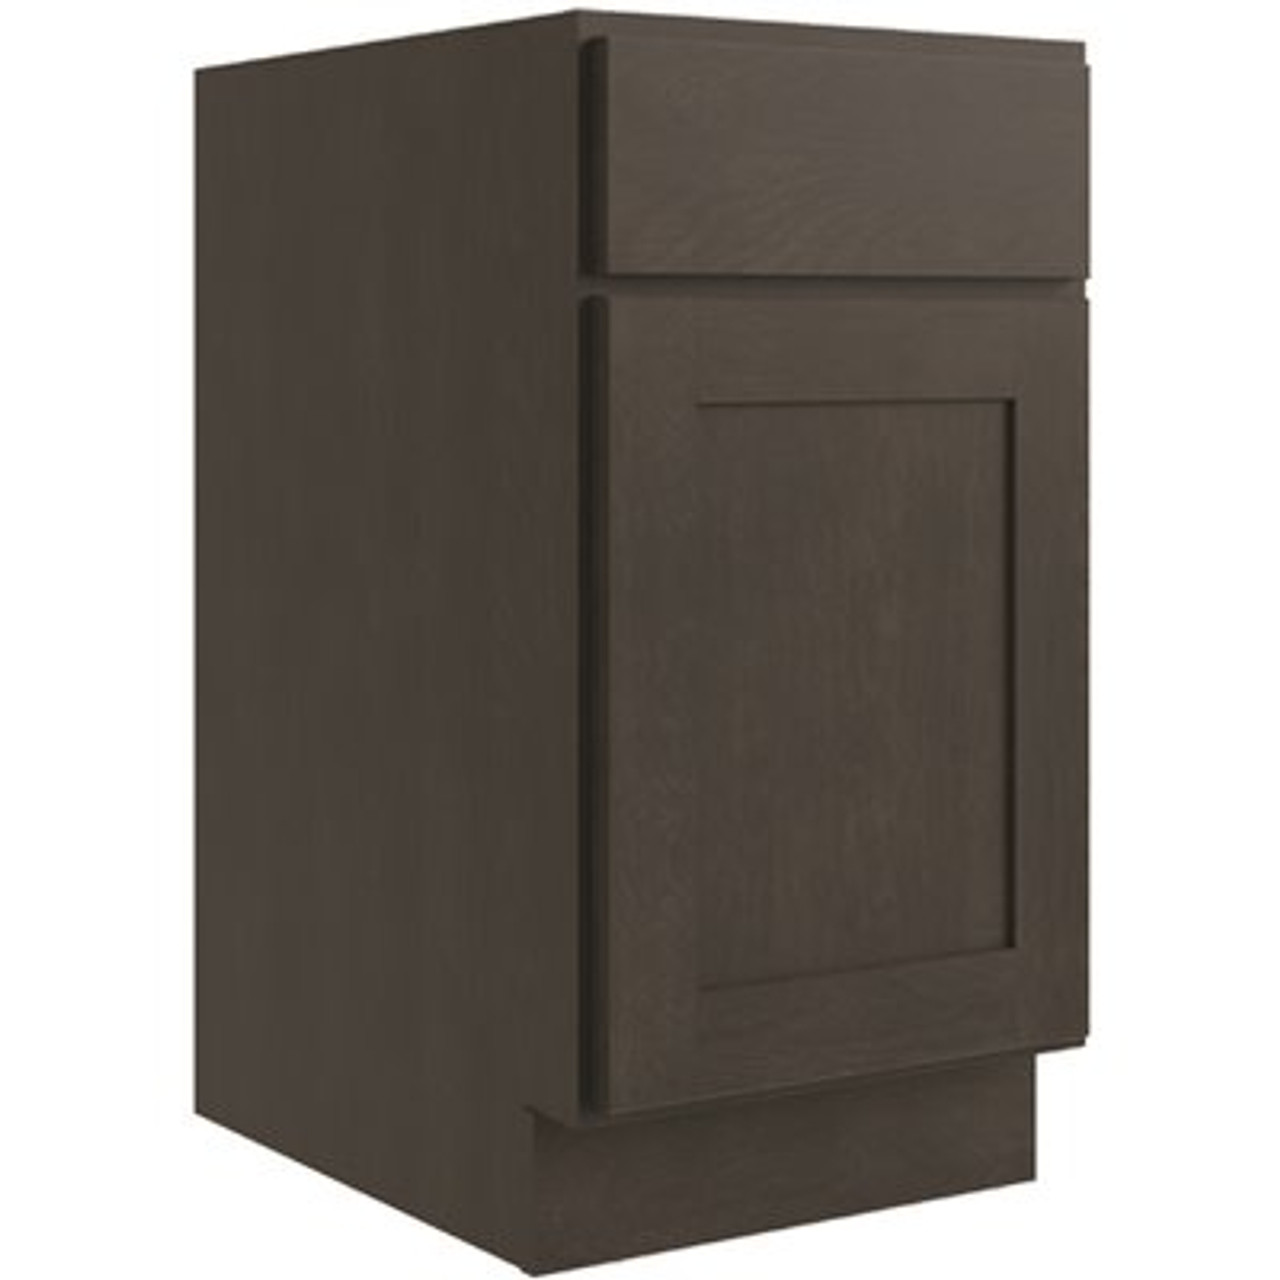 CNC Cabinetry Luxor Waste Basket Cabinet, 18"w X 24"d, Shaker Smoky Grey